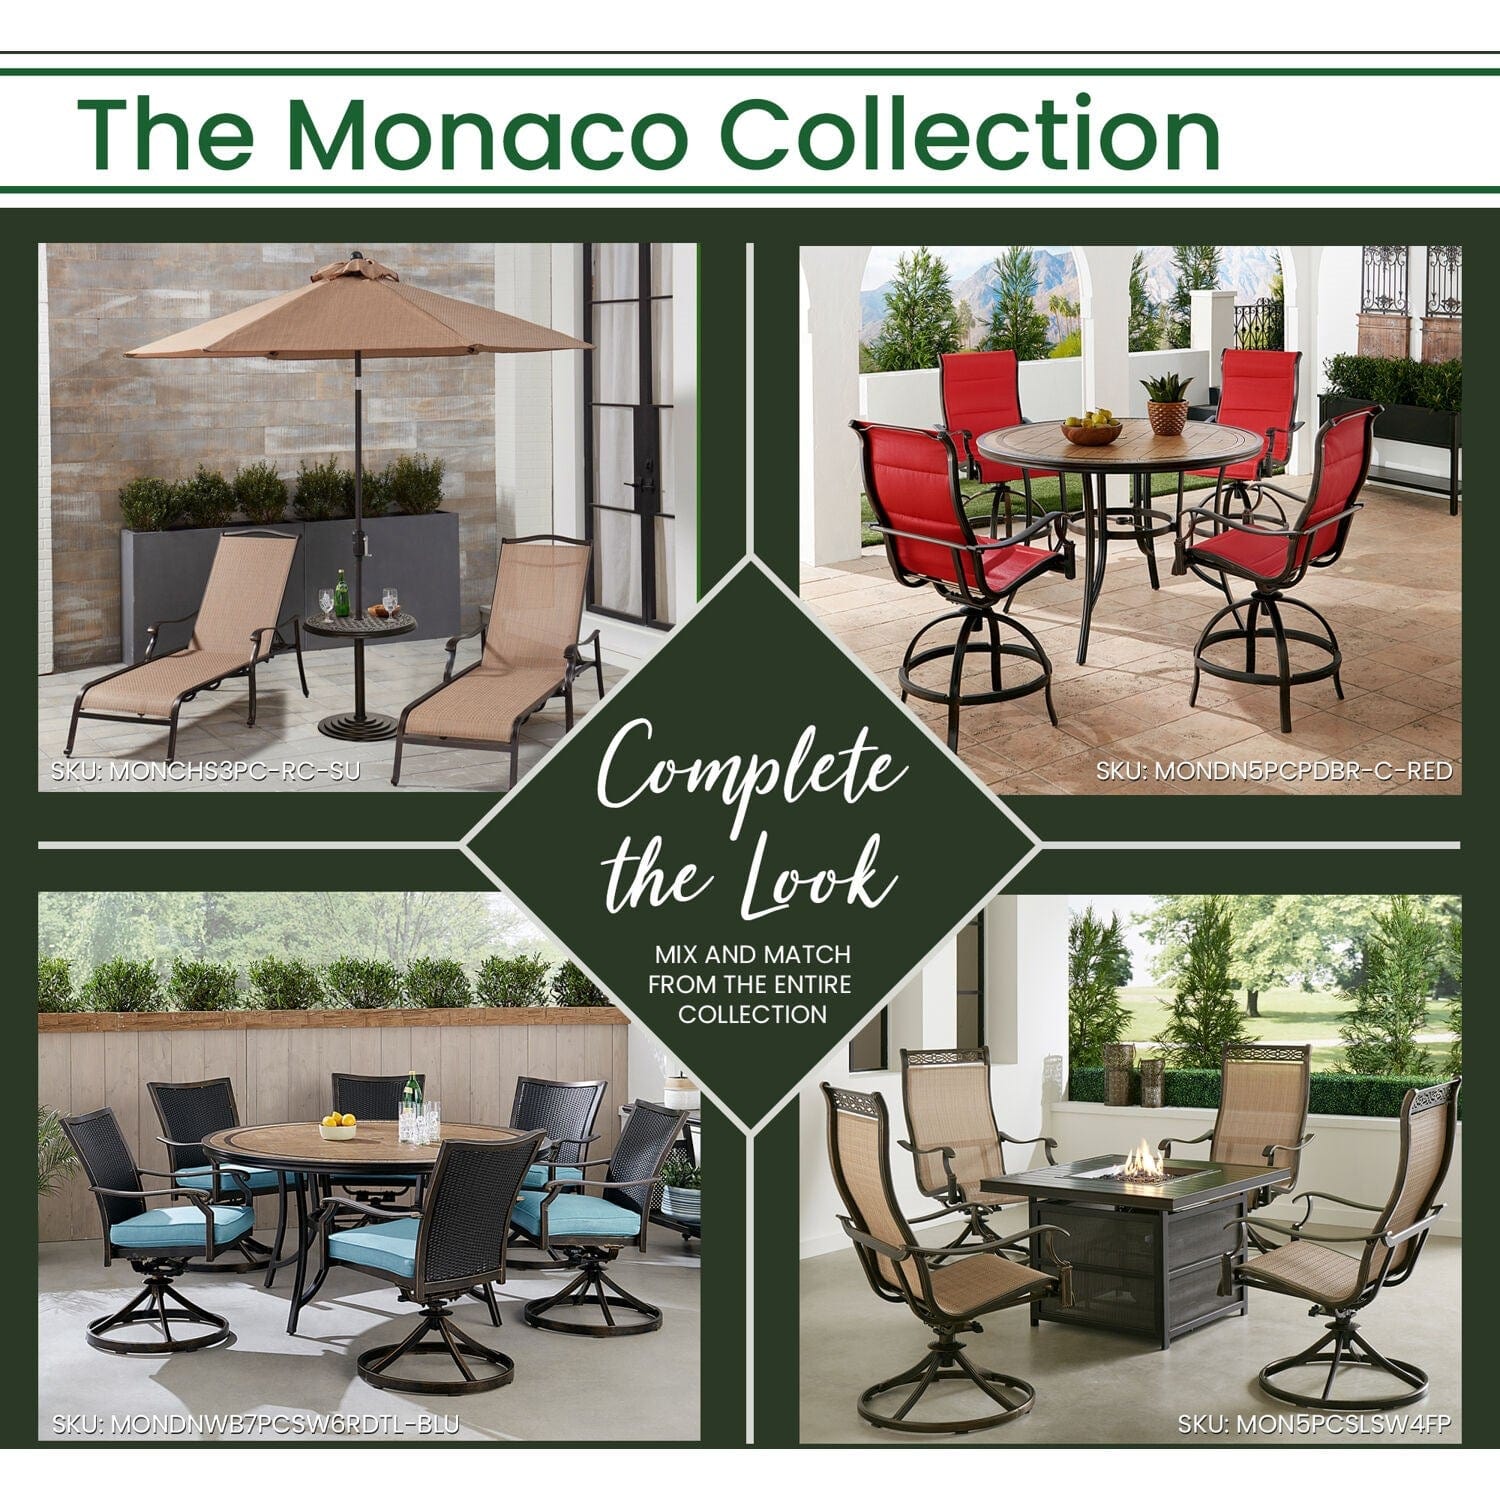 Hanover Outdoor Dining Set Hanover Monaco 7-Piece Dining Set in Blue with Six Swivel Rockers, 60-in. Tile-Top Table and 9-Ft. Umbrella | MONDN7PCSW6RDTLC-SU-B